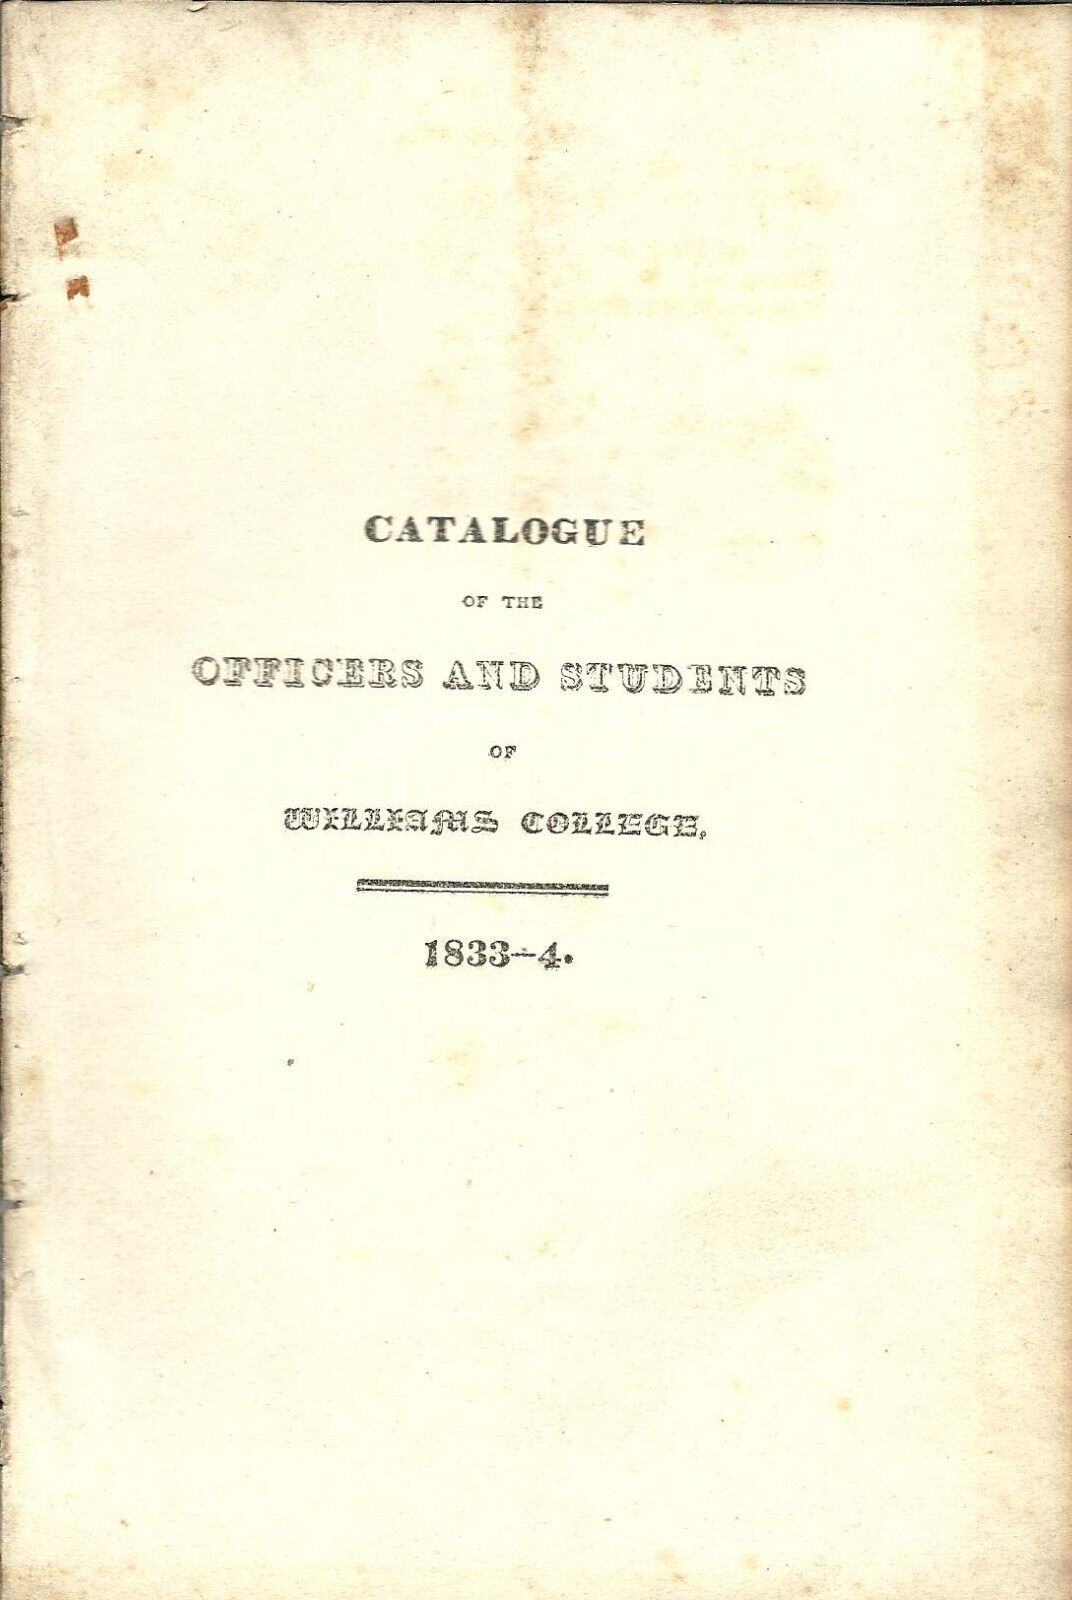 Catalogue of the Officers and Students of Williams College 1833-4. Not a reprint